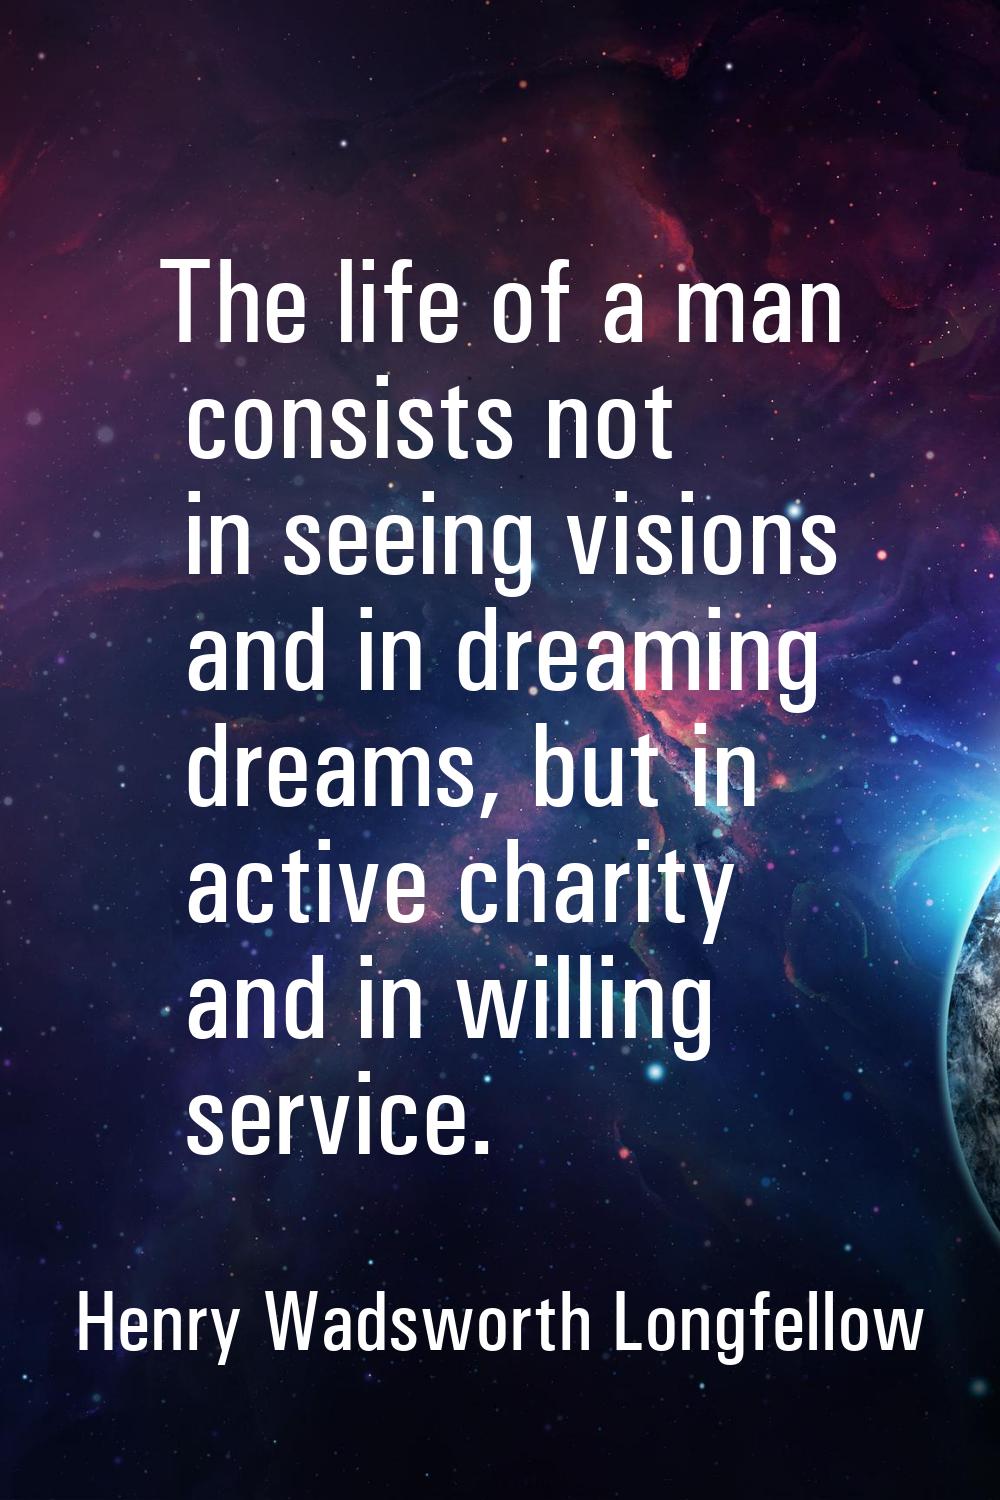 The life of a man consists not in seeing visions and in dreaming dreams, but in active charity and 